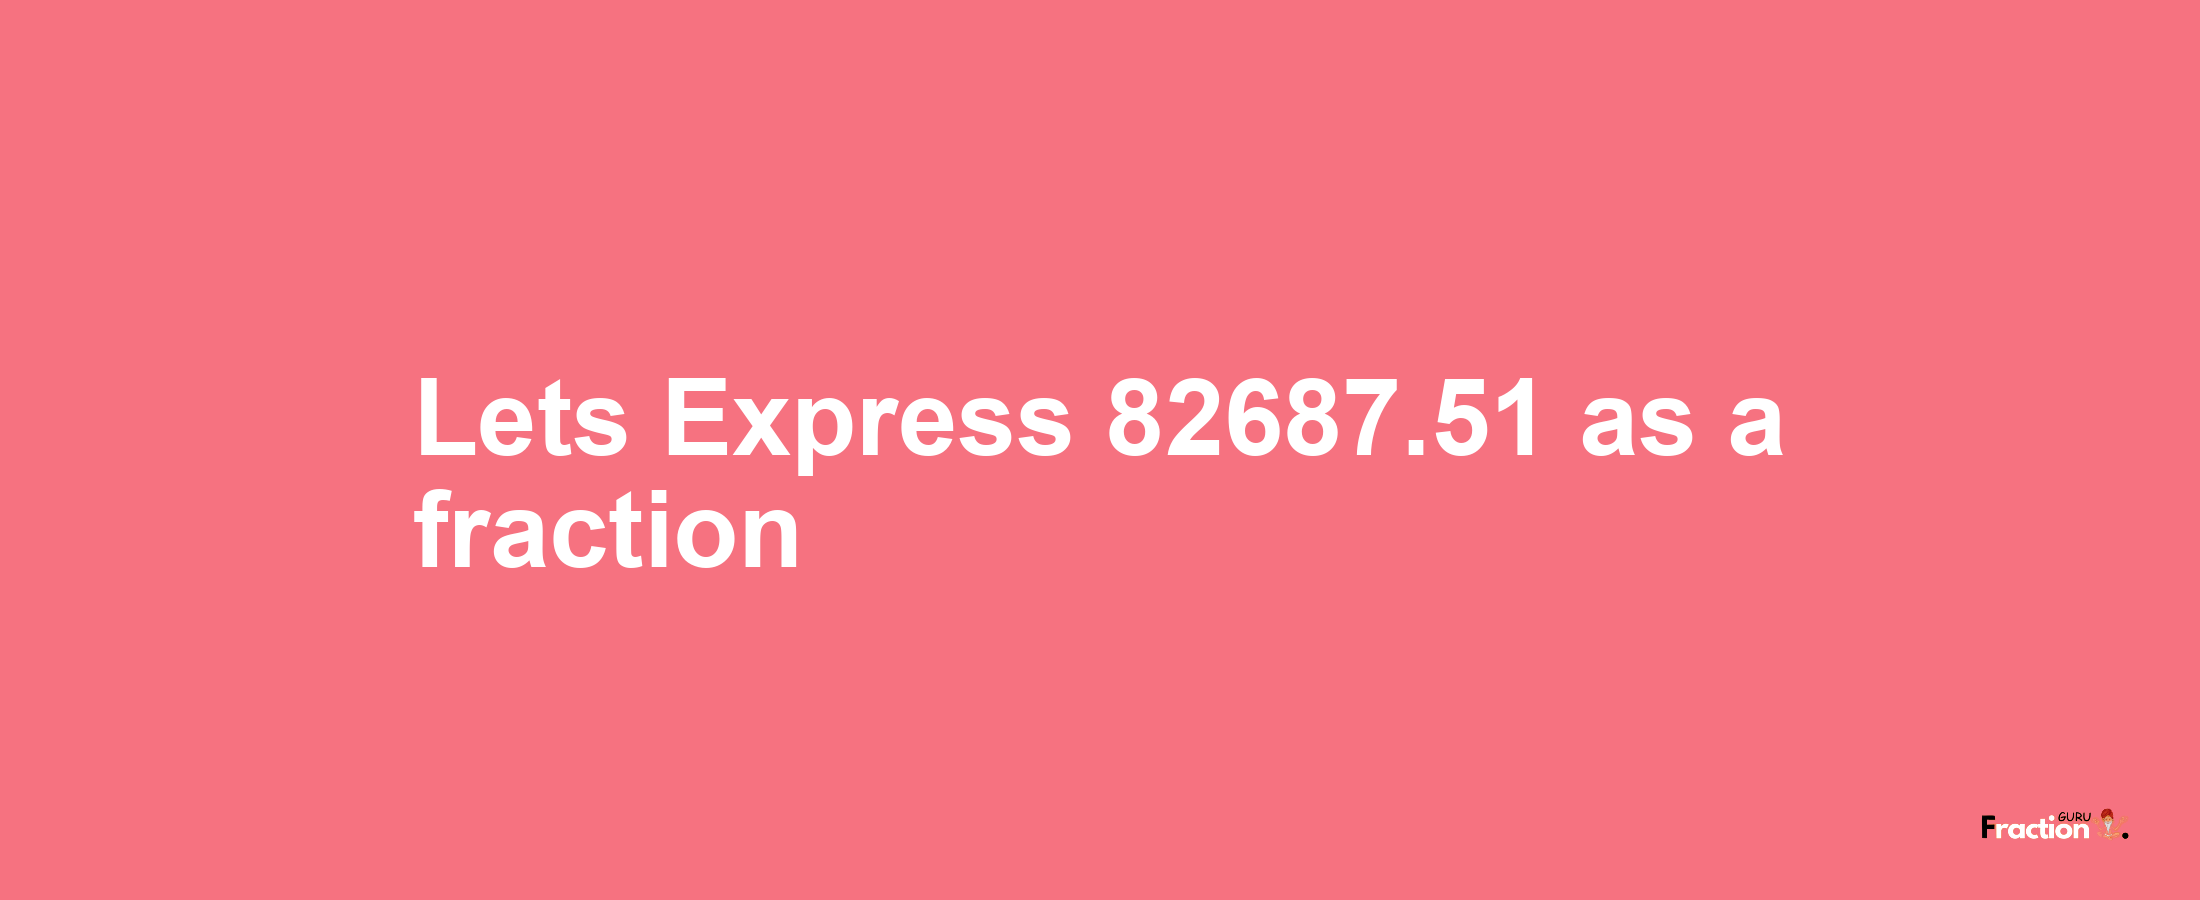 Lets Express 82687.51 as afraction